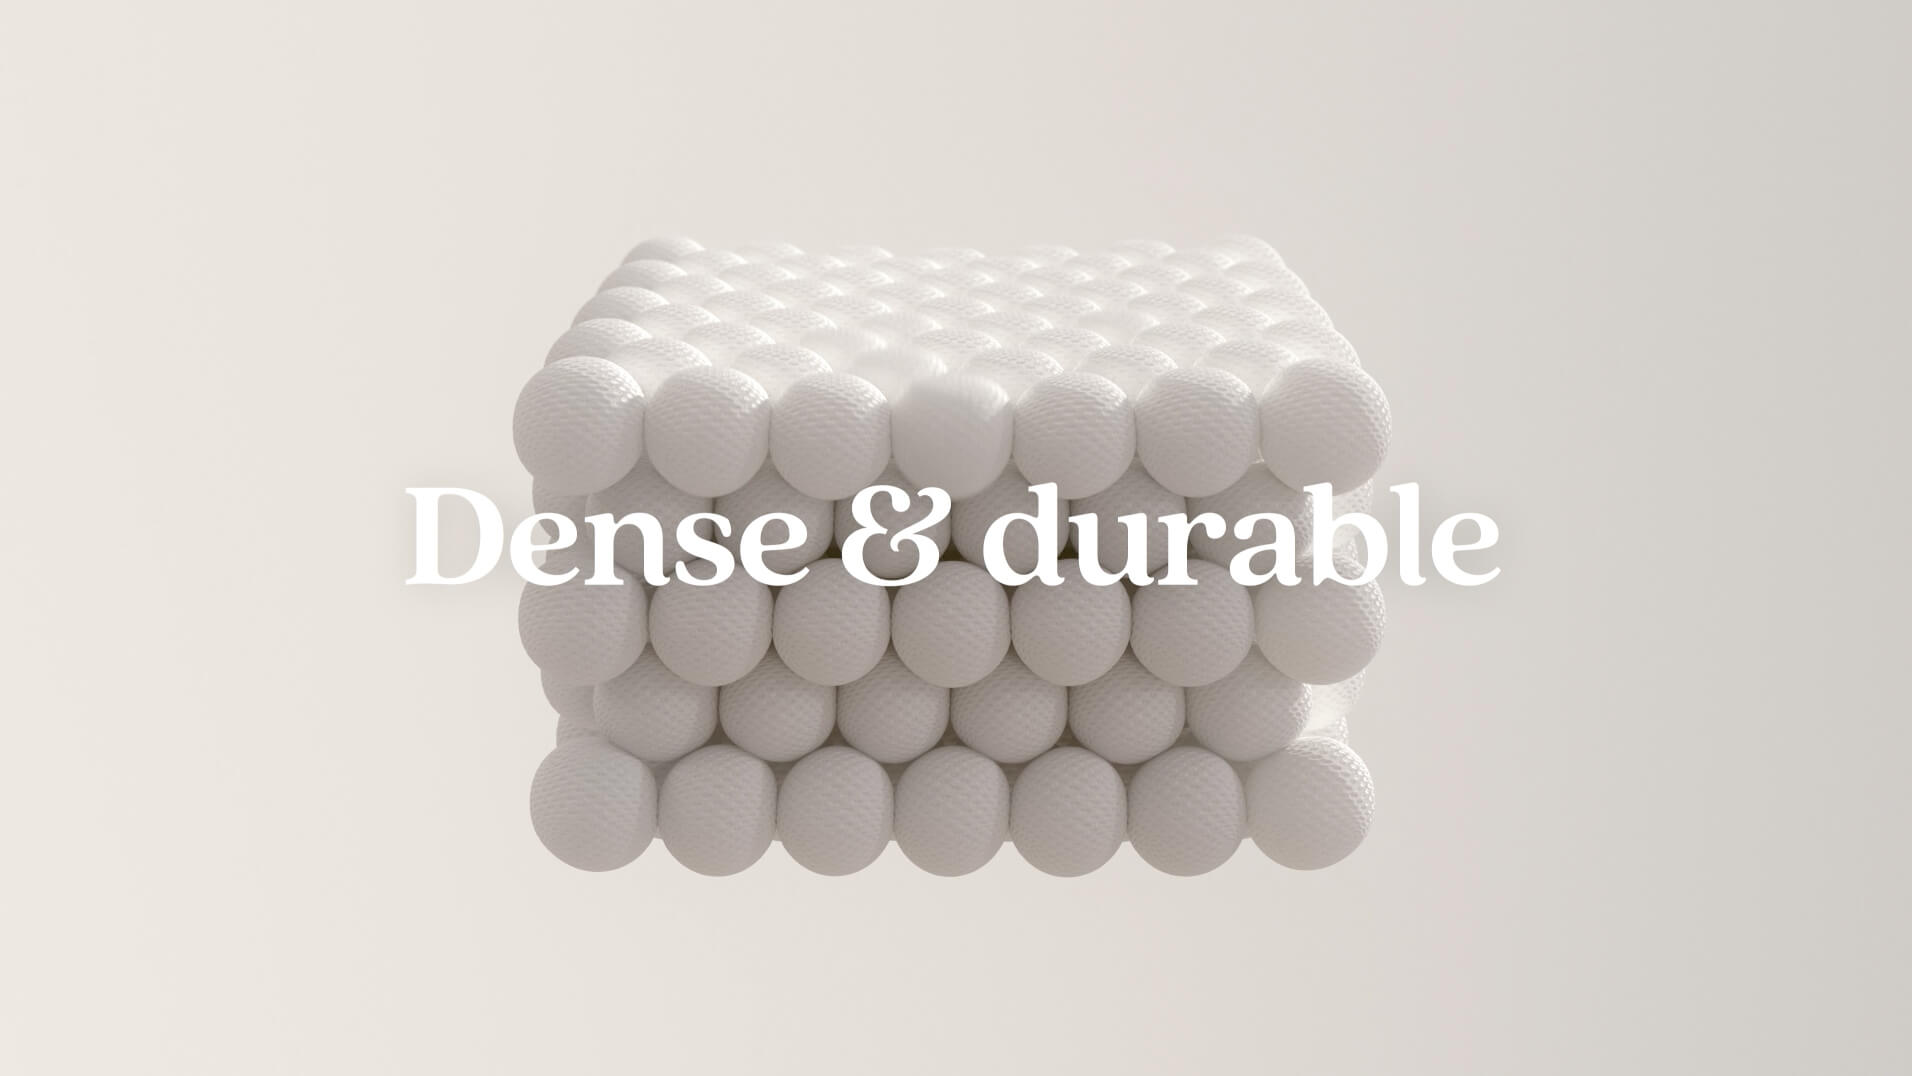 Koala Kloudcell television campaign commercial showing CGI graphics that says dense and durable.